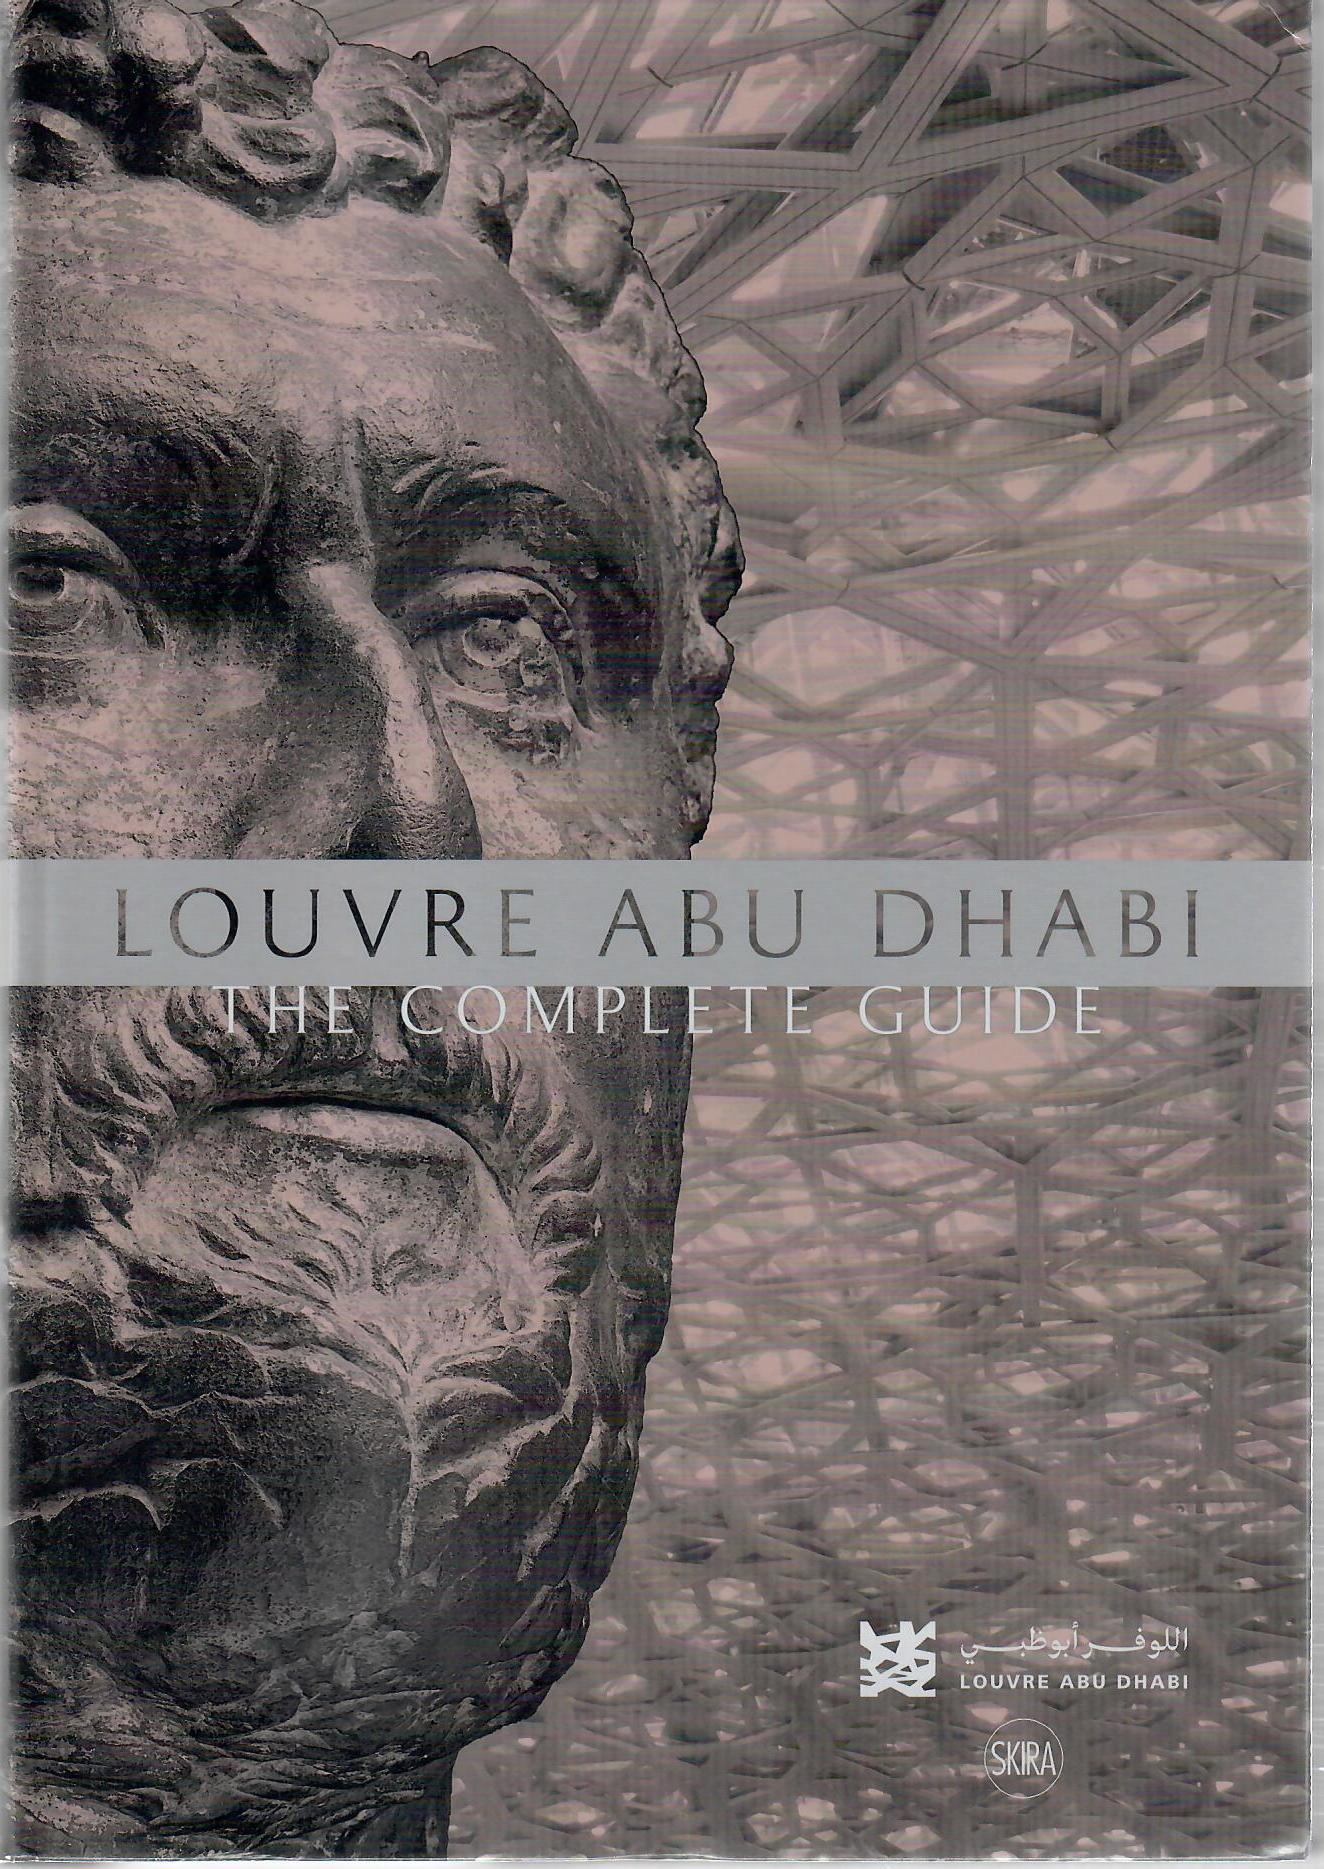 LOUVER ABU DHABI THE COMPLETE GUIDE